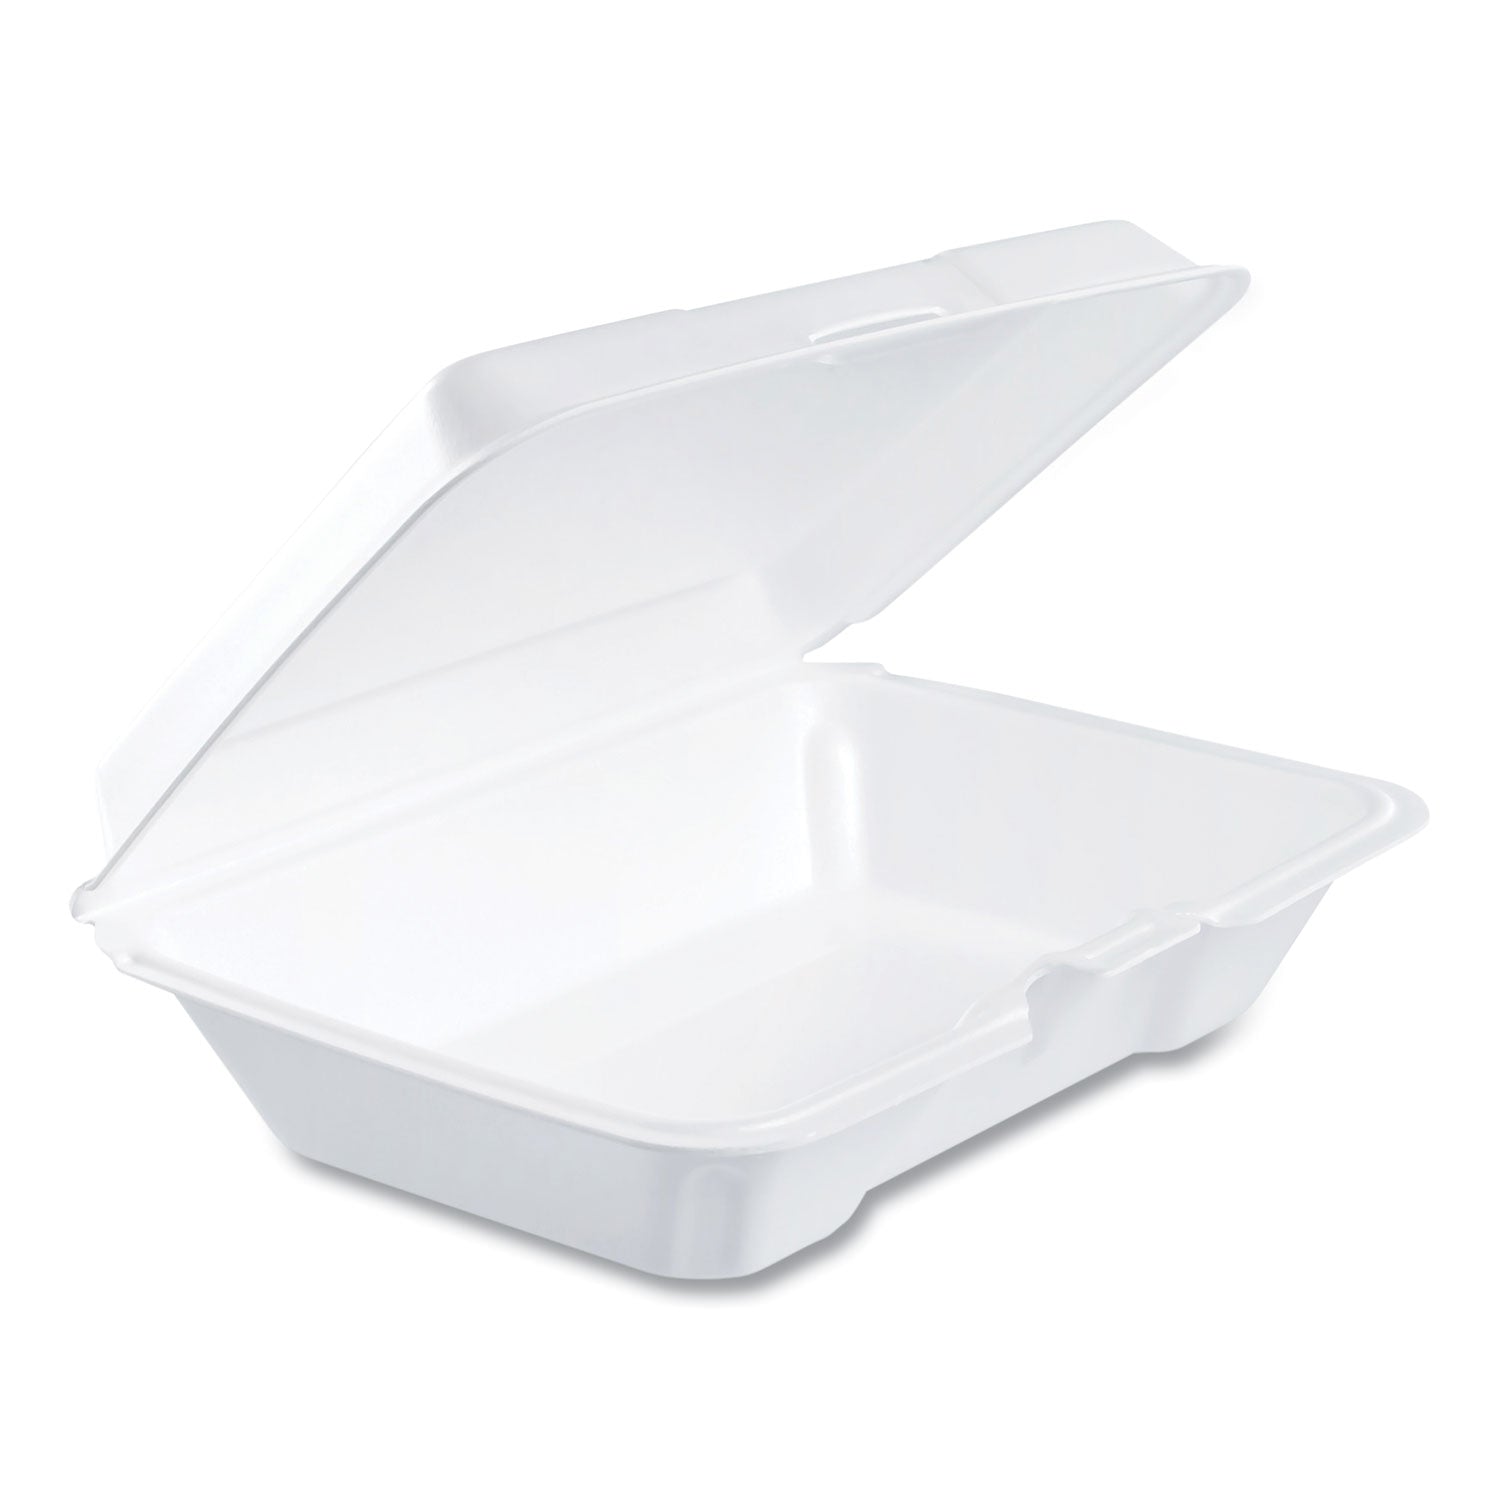 Foam Hinged Lid Containers, 6.4 x 9.3 x 2.6, White, 200/Carton